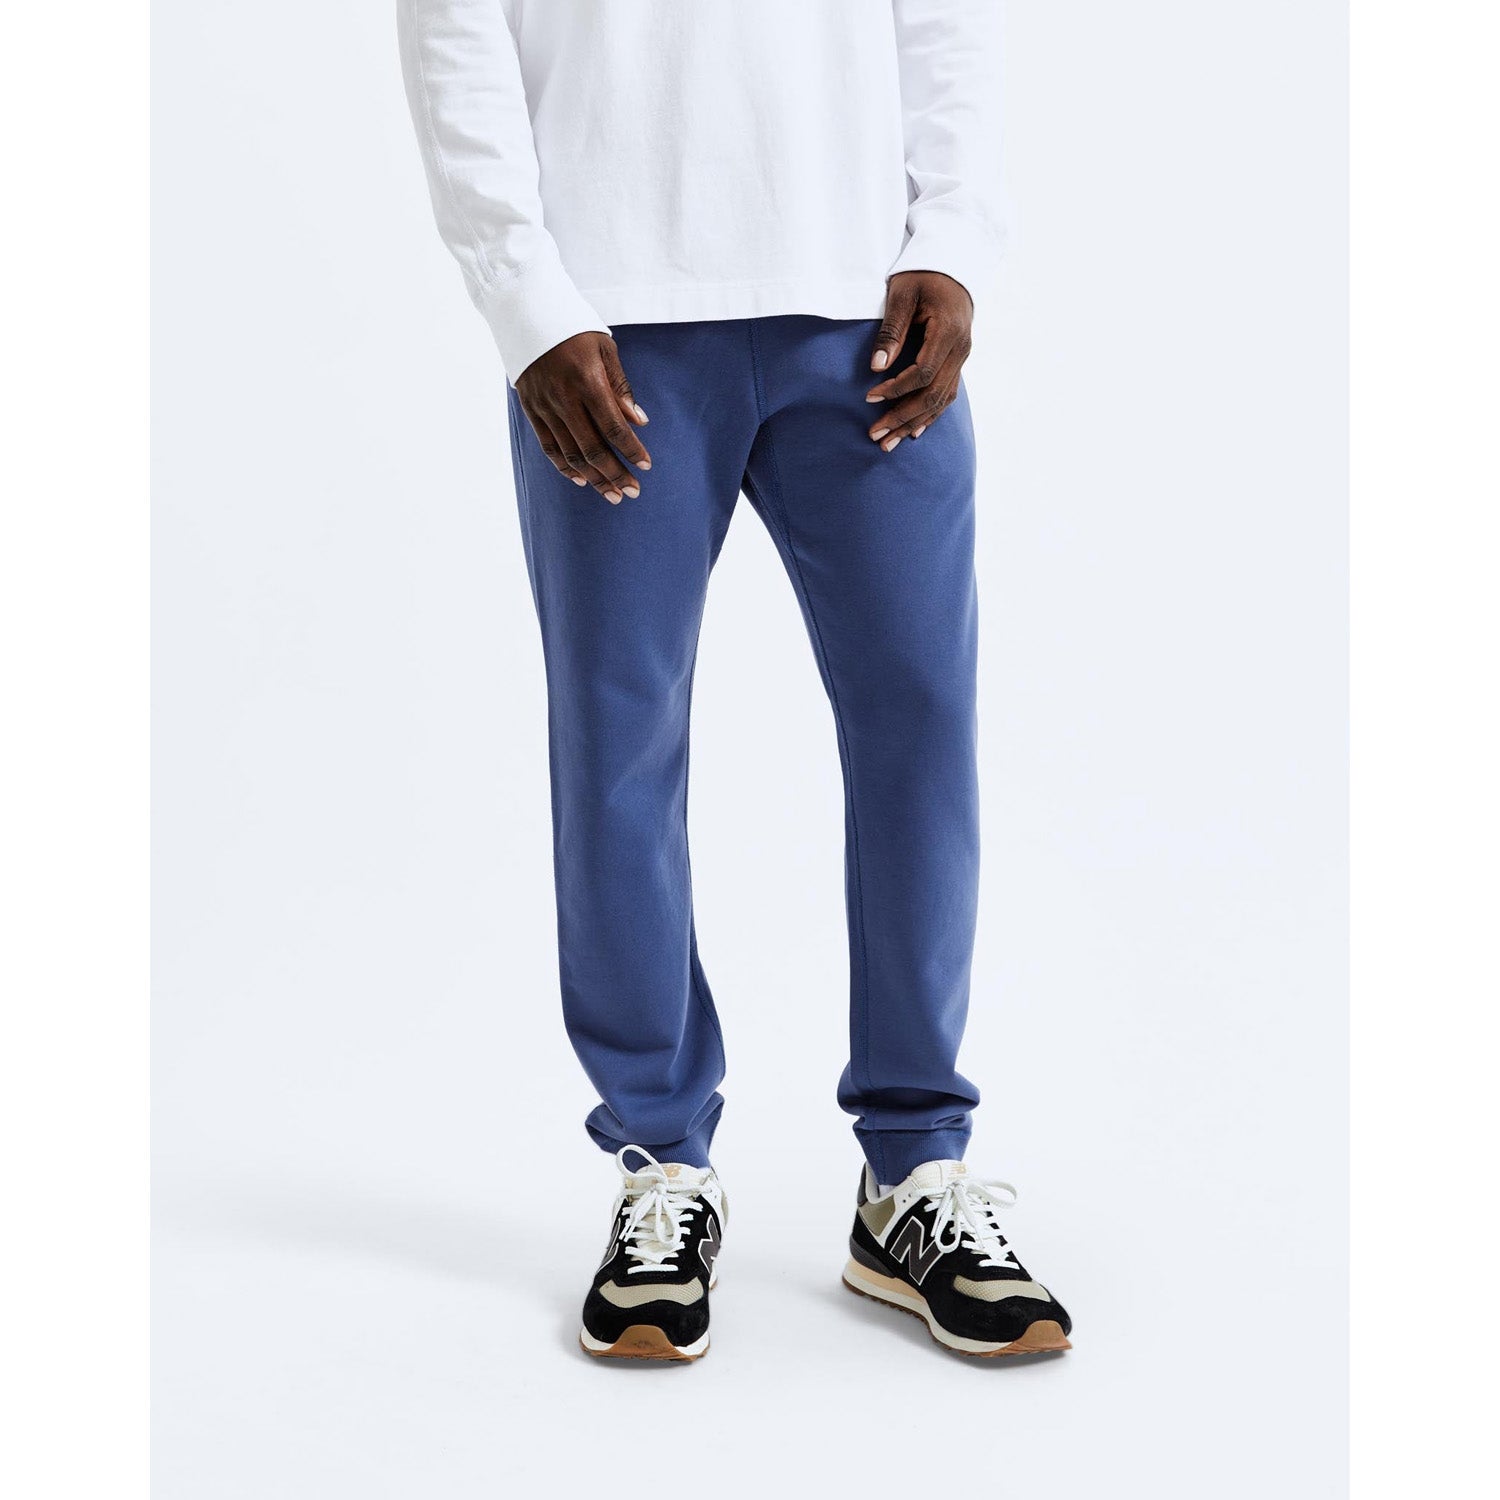 Increase quantity for Reigning Champ Men Knit Mid Wt Terry Slim Sweatpant Lapis RC-5075-LPS - BOTTOMS Canada